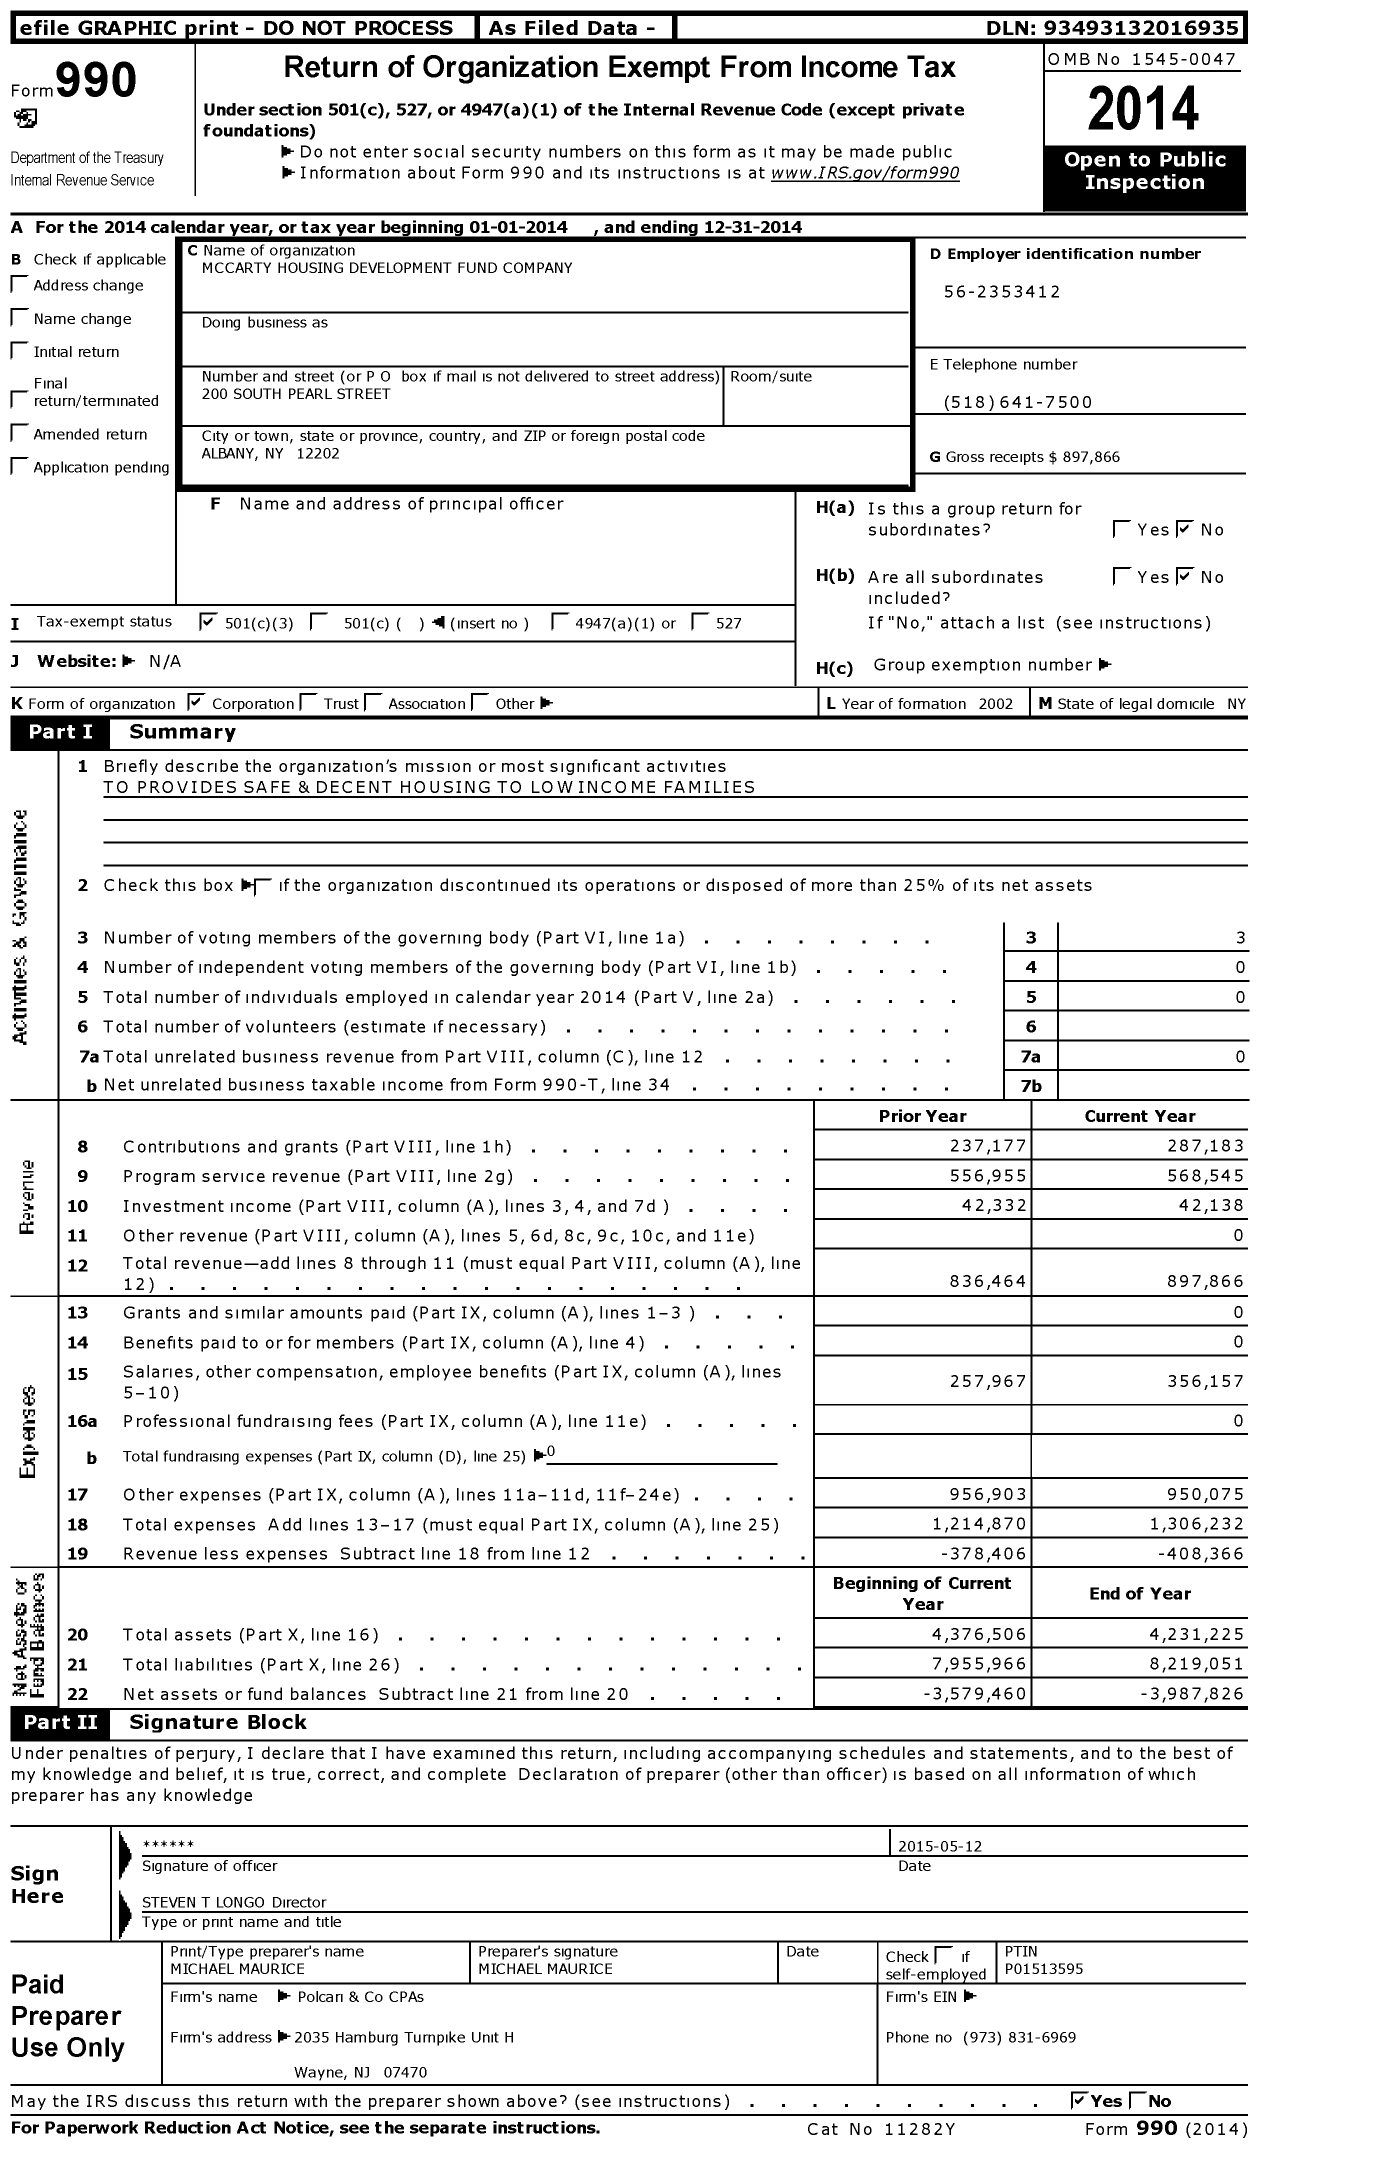 Image of first page of 2014 Form 990 for Mccarty Housing Development Fund Company